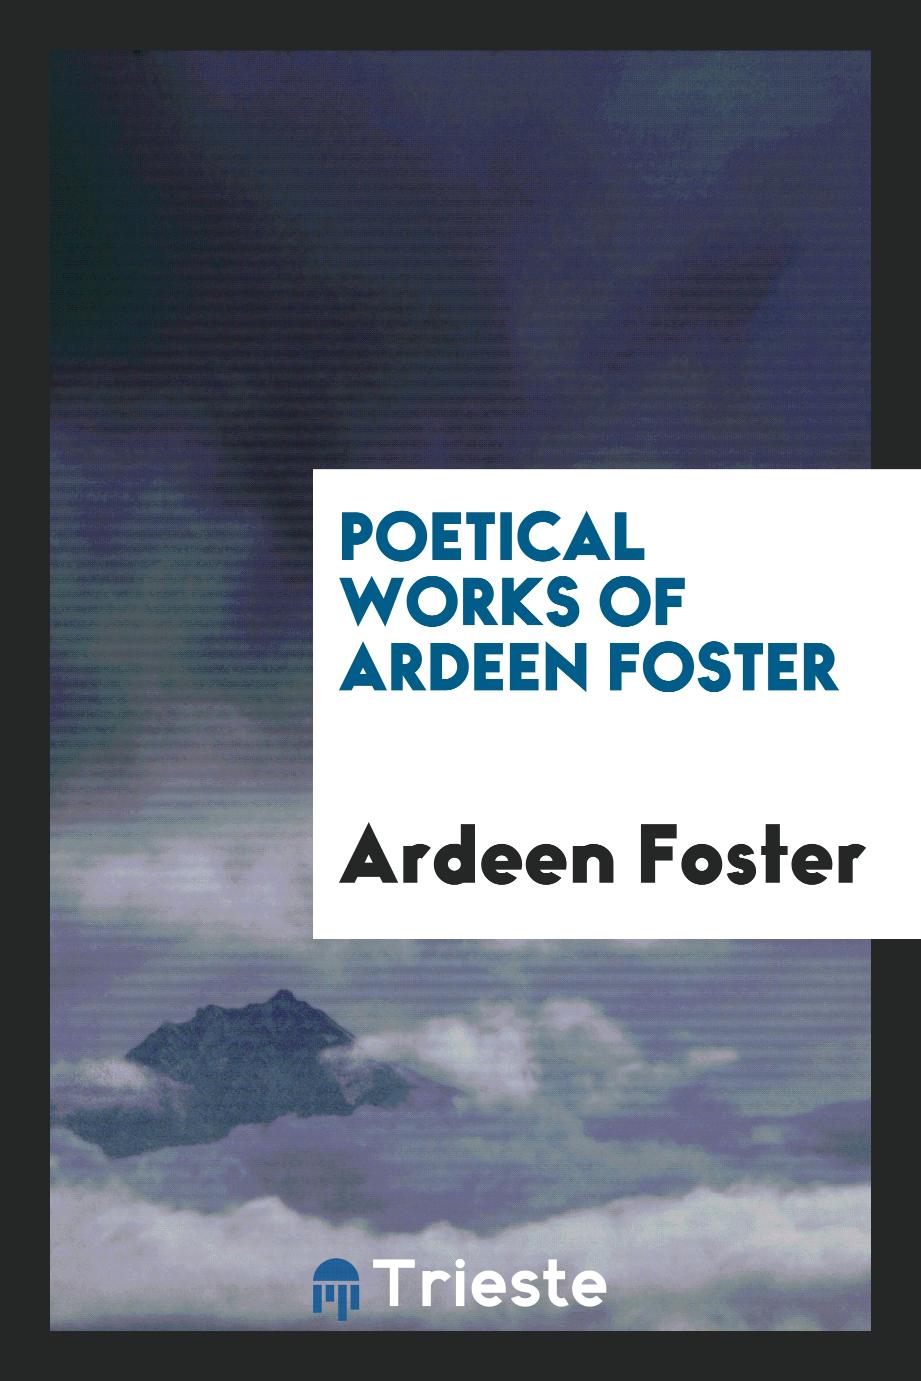 Poetical works of Ardeen Foster